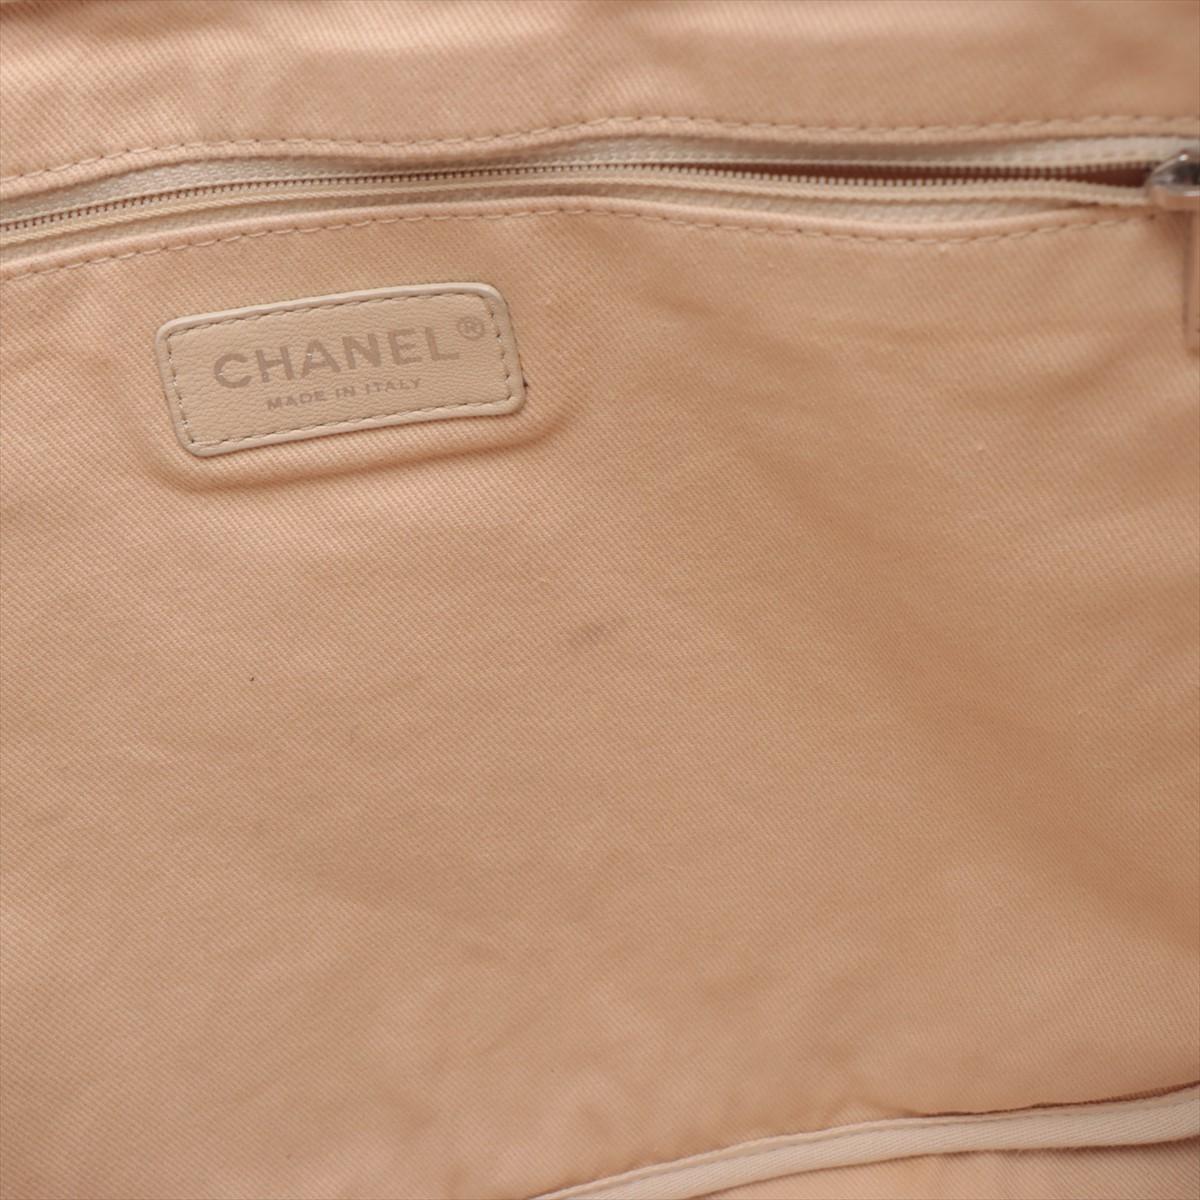 Chanel Canvas Deauville Tote Bag Light Beige For Sale 9